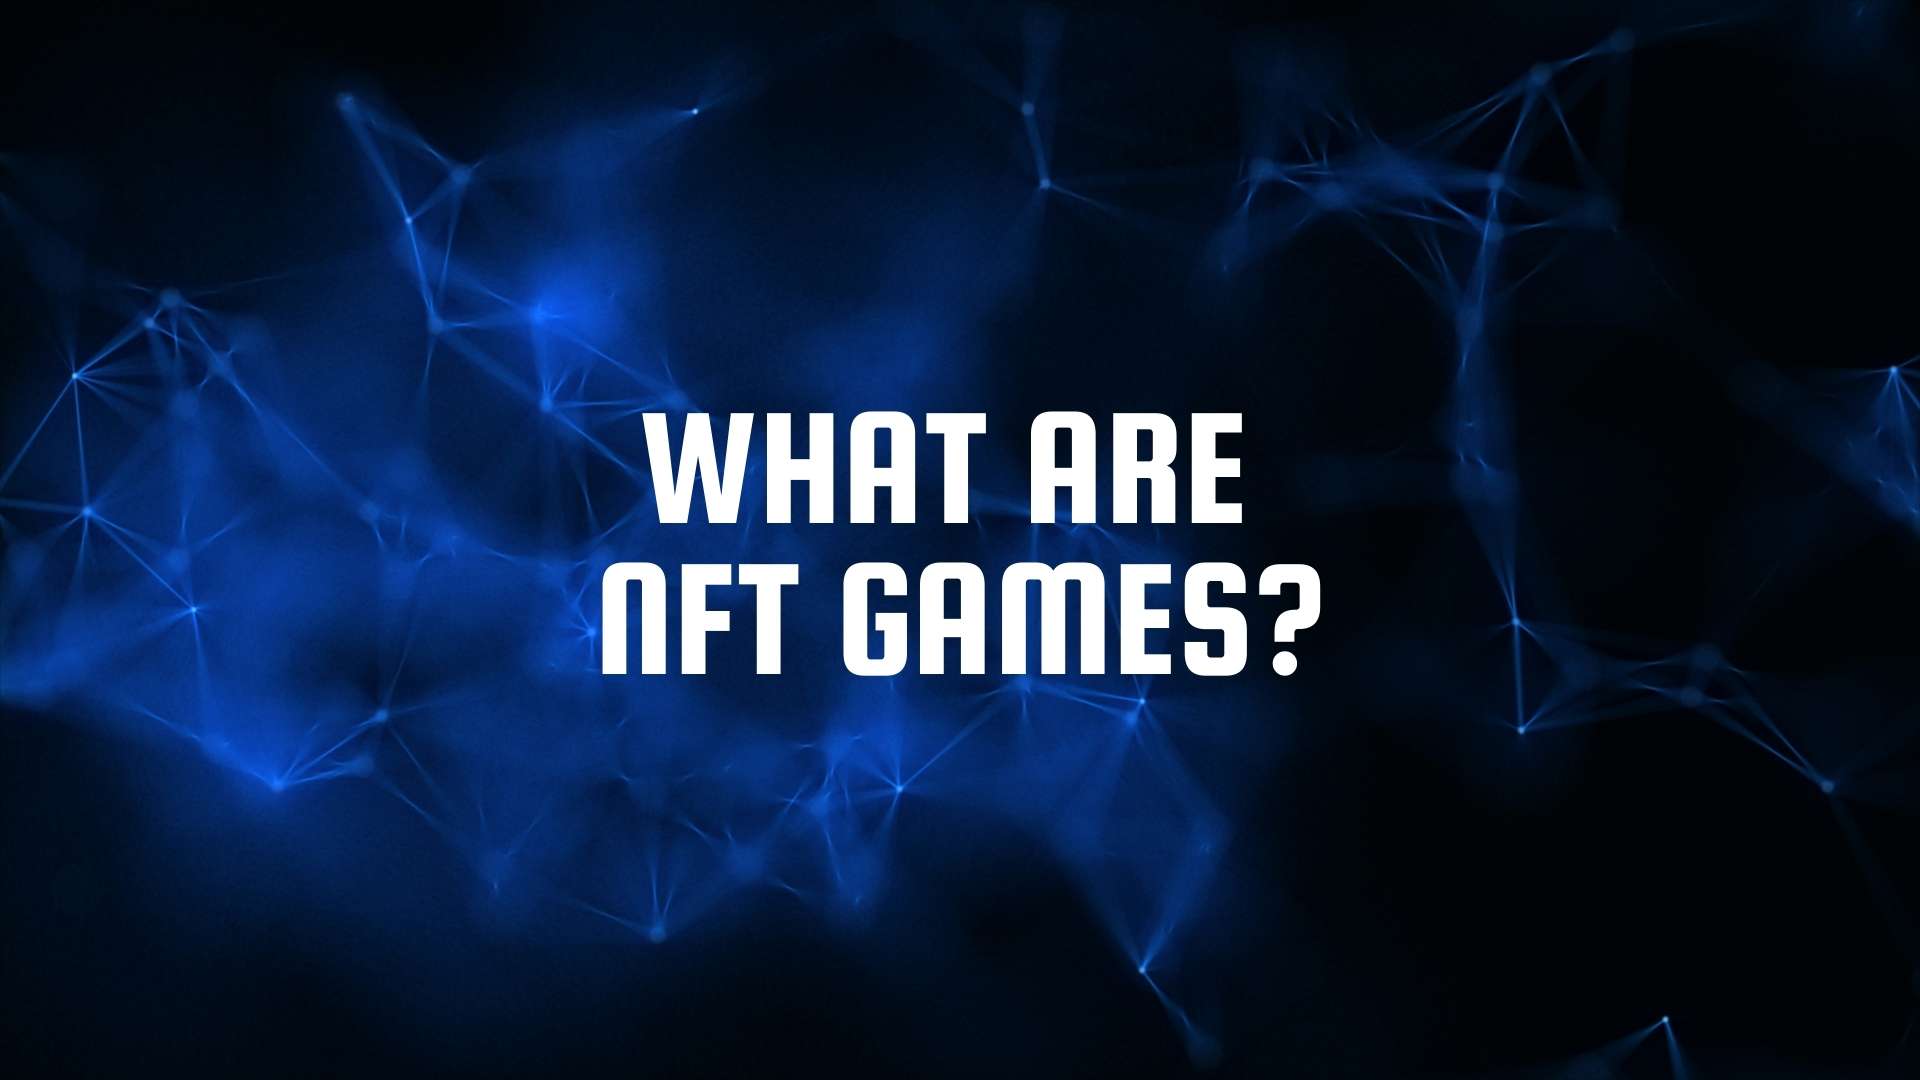 What are NFT games - explained